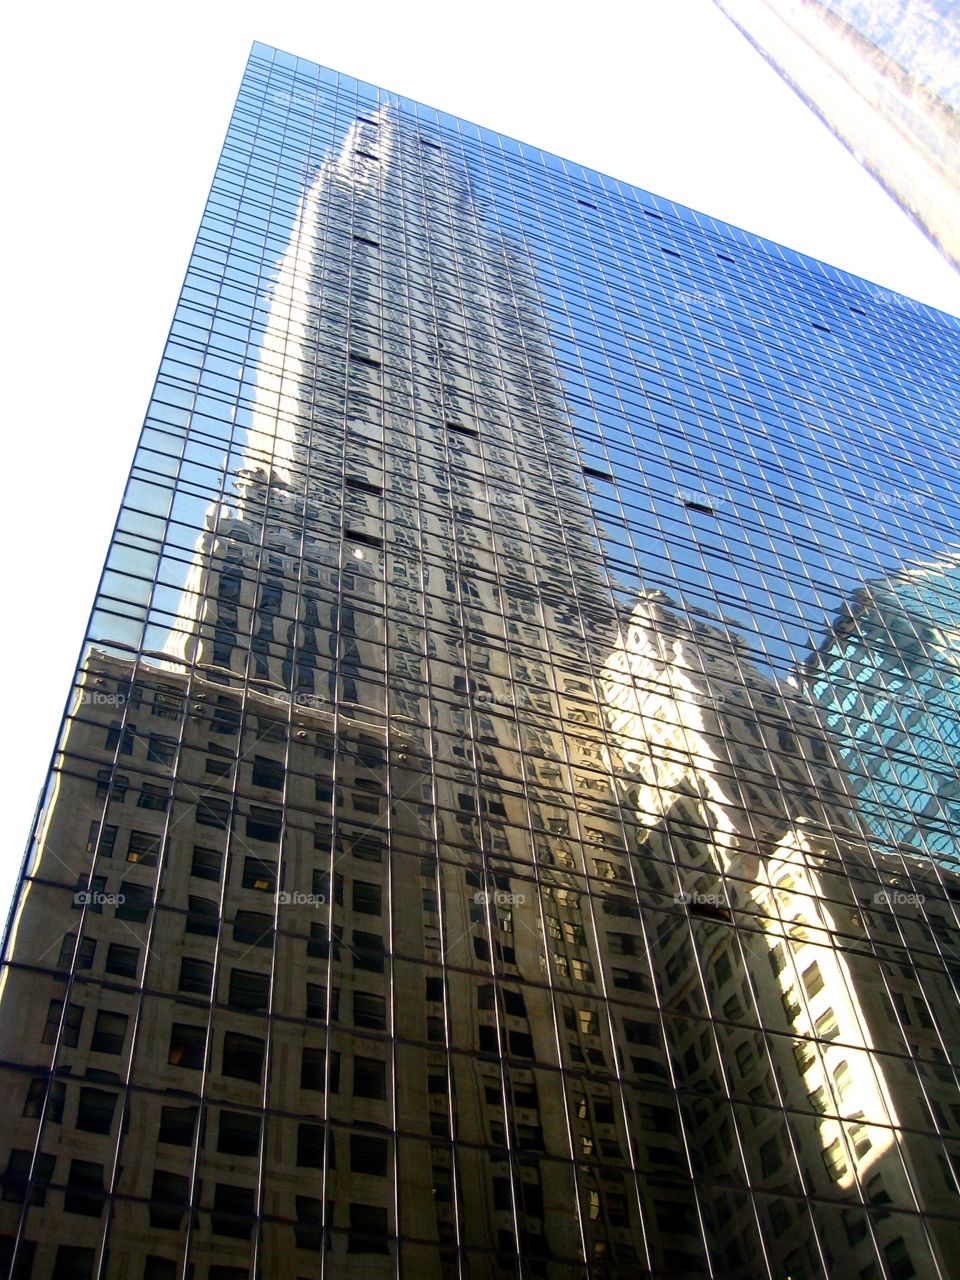 Reflections of Chrysler. The Chrysler Building reflected off a glass building across the street in Manhattan, New York